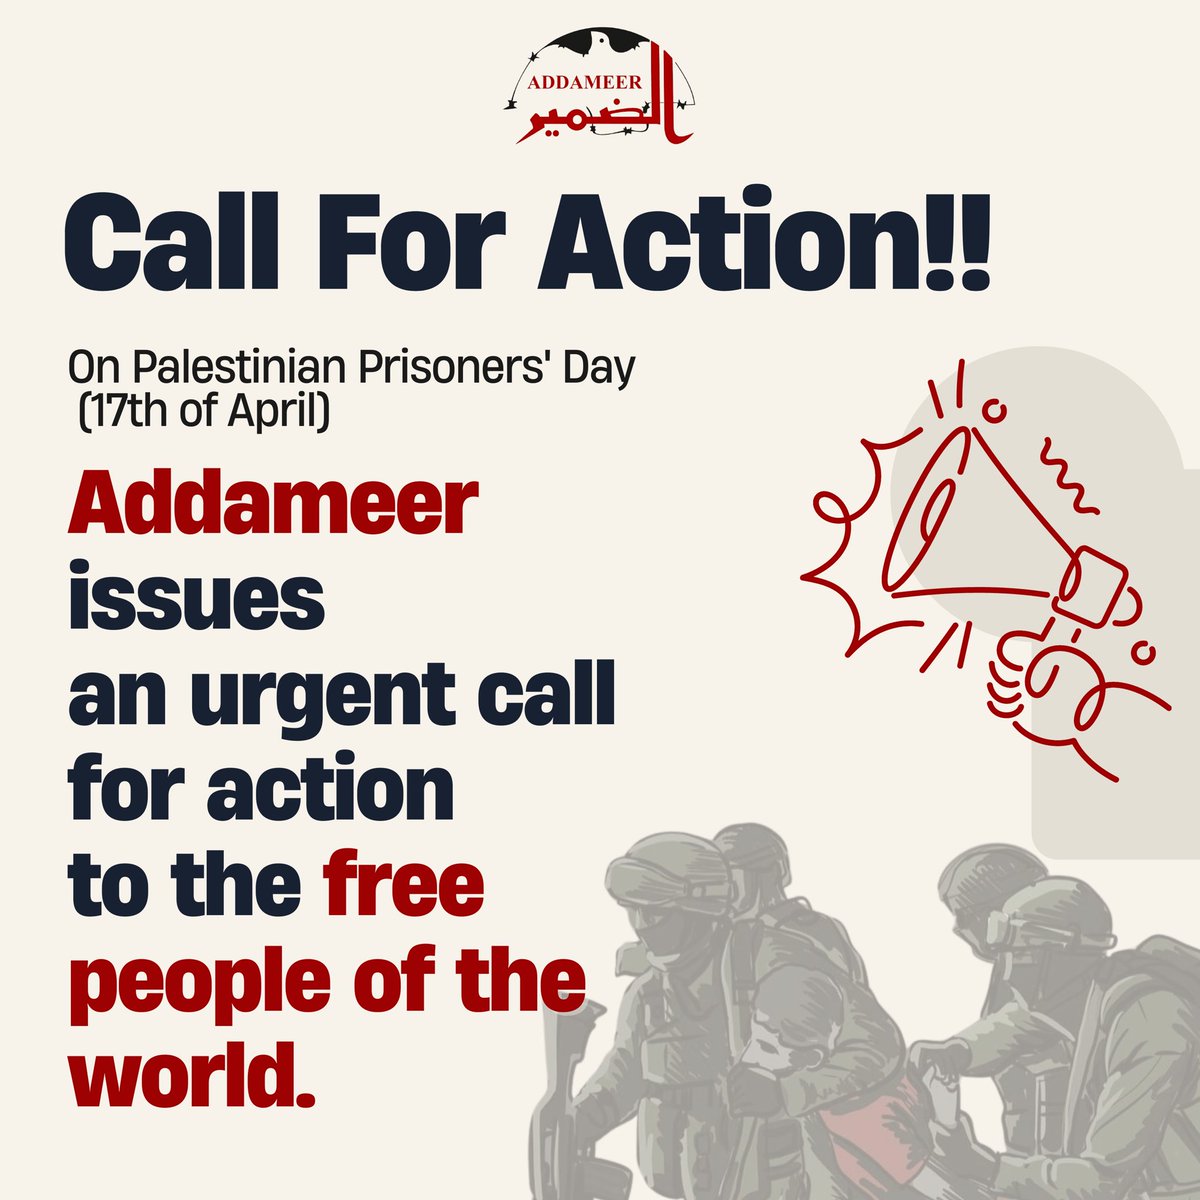 📣 Call for Action: Addameer asks for your solidarity to put an end to the occupation’s prison systems and applying pressure on the occupation authorities to Free Palestinian Prisoners #PalestinianPrisonersDay #April17 #notoenforceddisappearances #stopgenocide